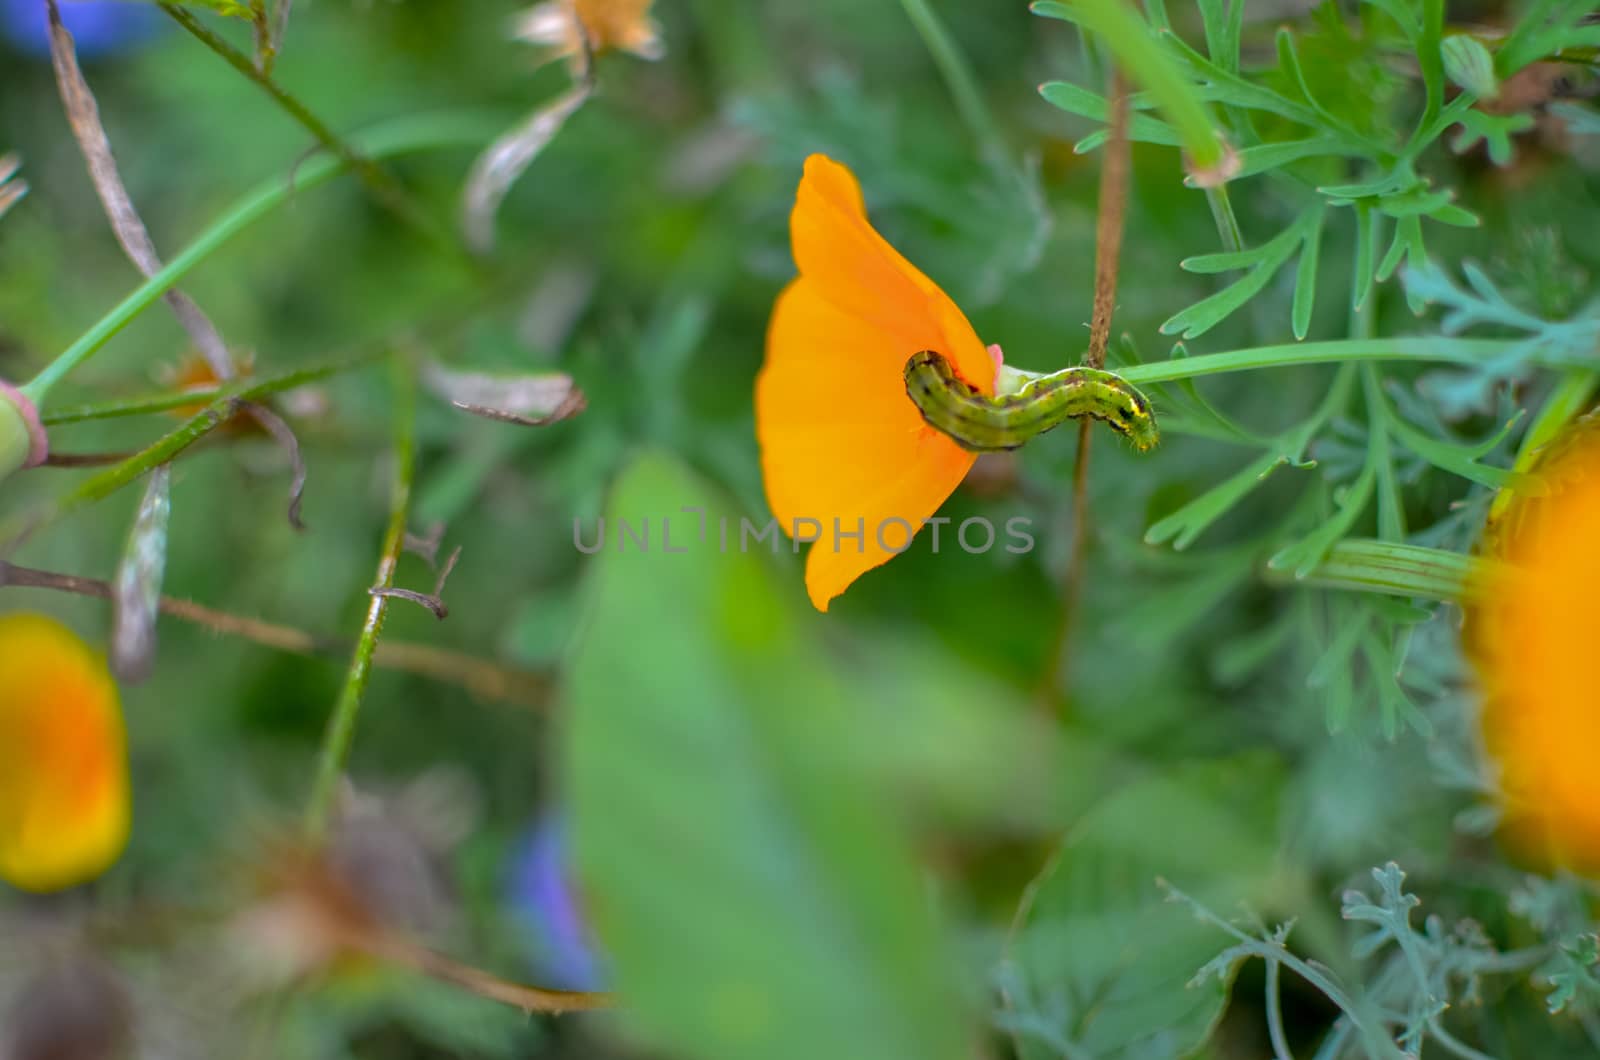 Orange eschscholzia on the green meadow closeup with blured background and caterpillar